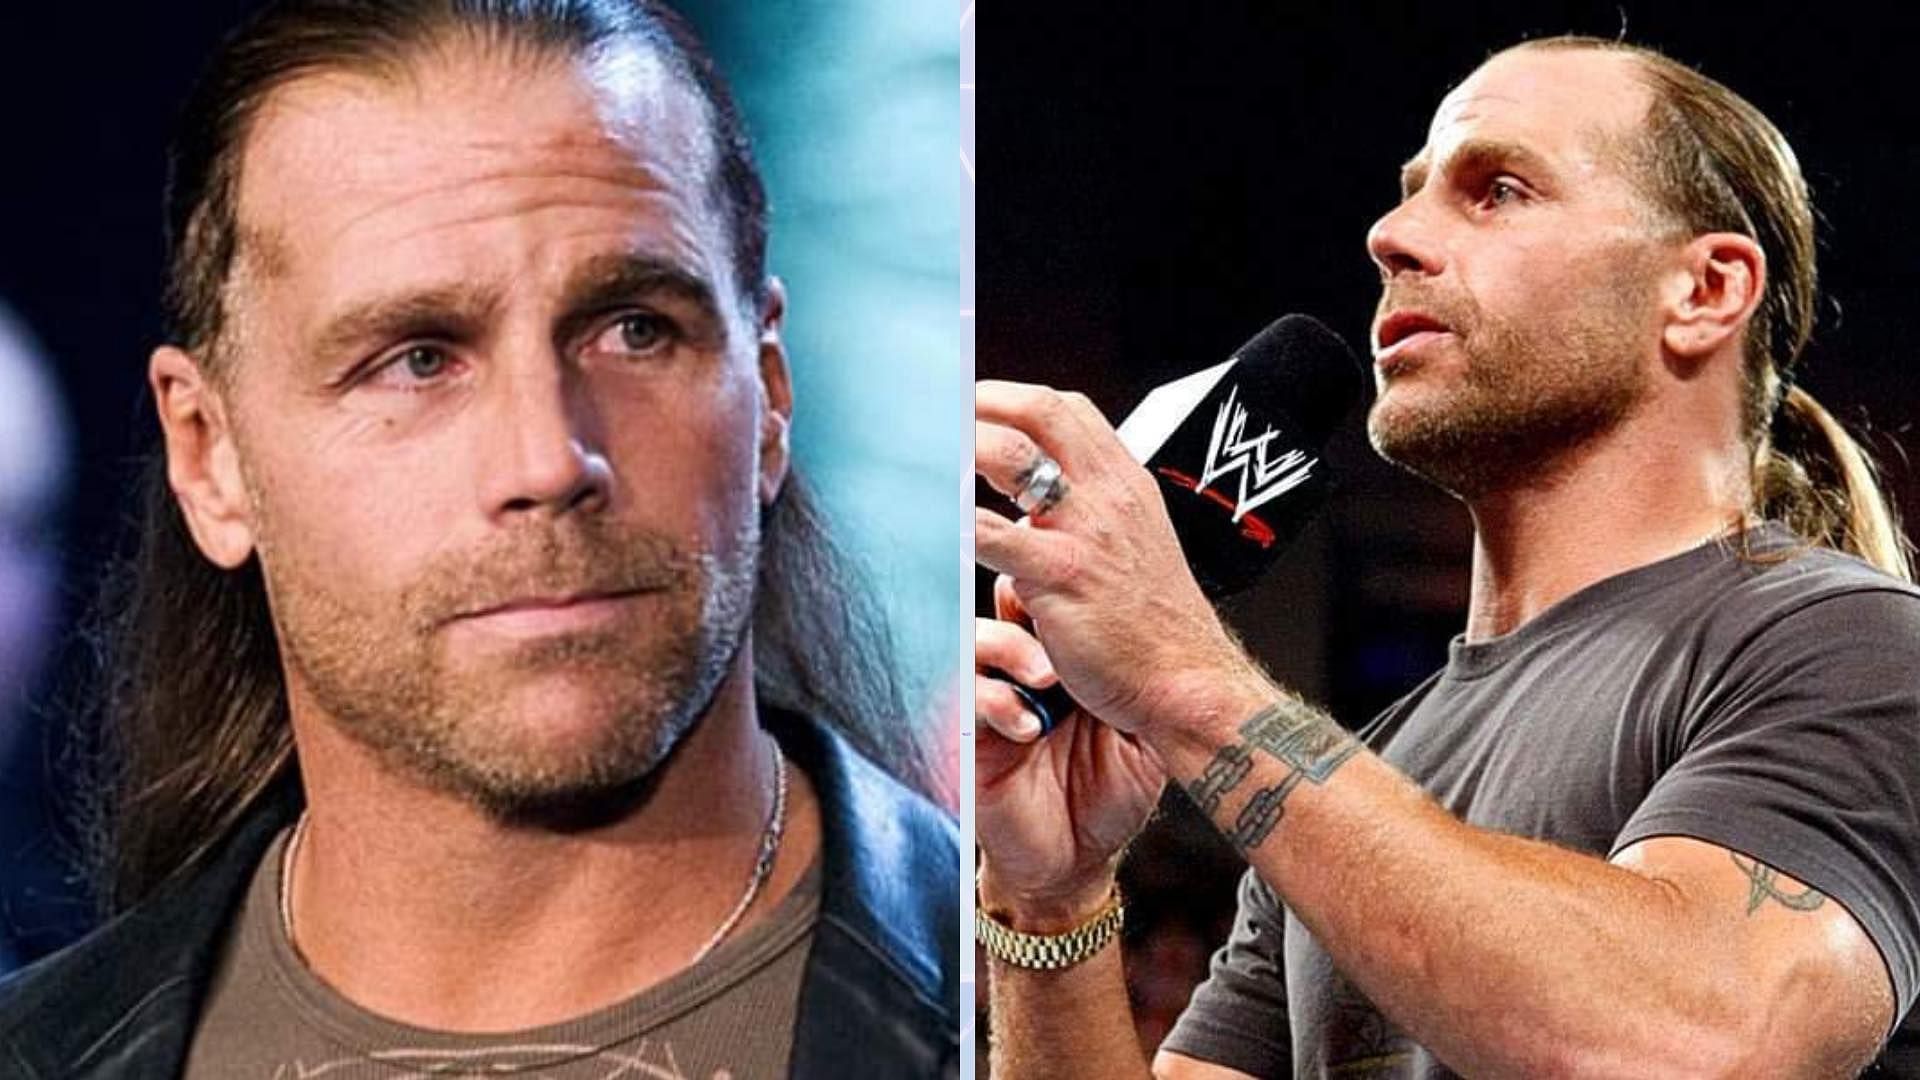 "I assume that lad hates writing" - Prime star takes an inexpensive shot at Shawn Michaels forward of a WWE present